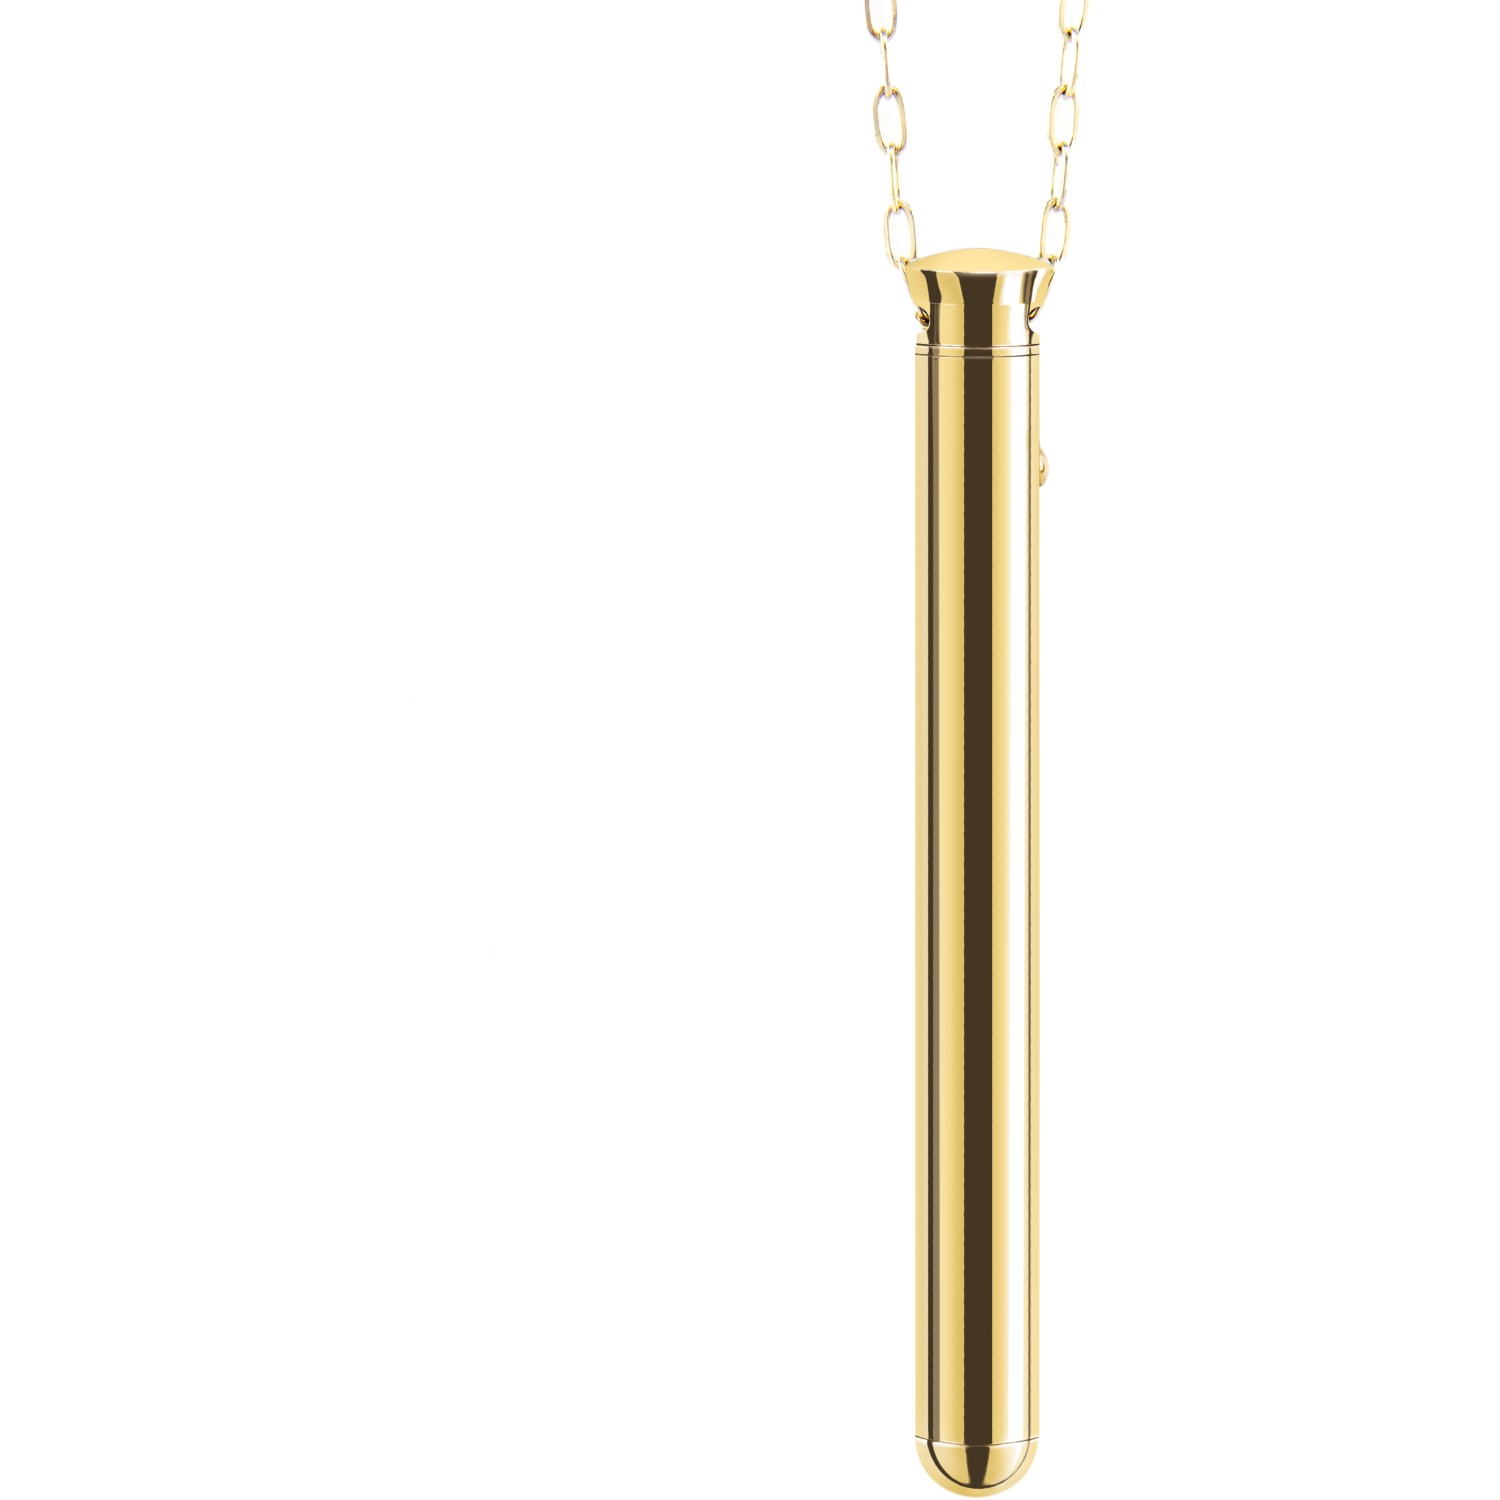  -   Vibrating Necklace Gold, le Wand LW-047-GD,  9.5 .